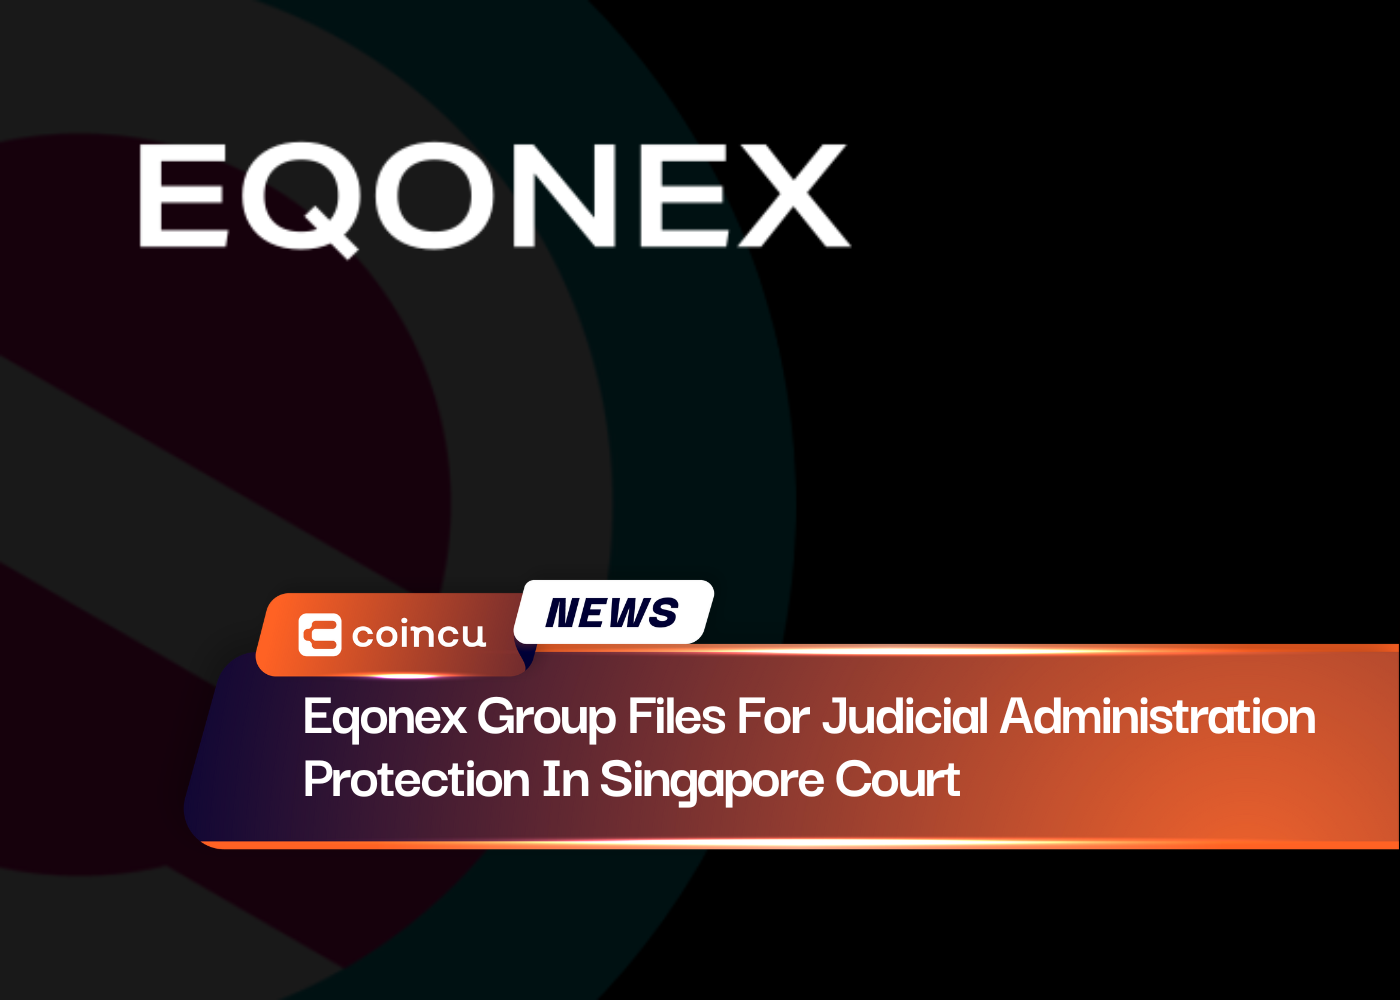 Eqonex Group Files For Judicial Administration Protection In Singapore Court